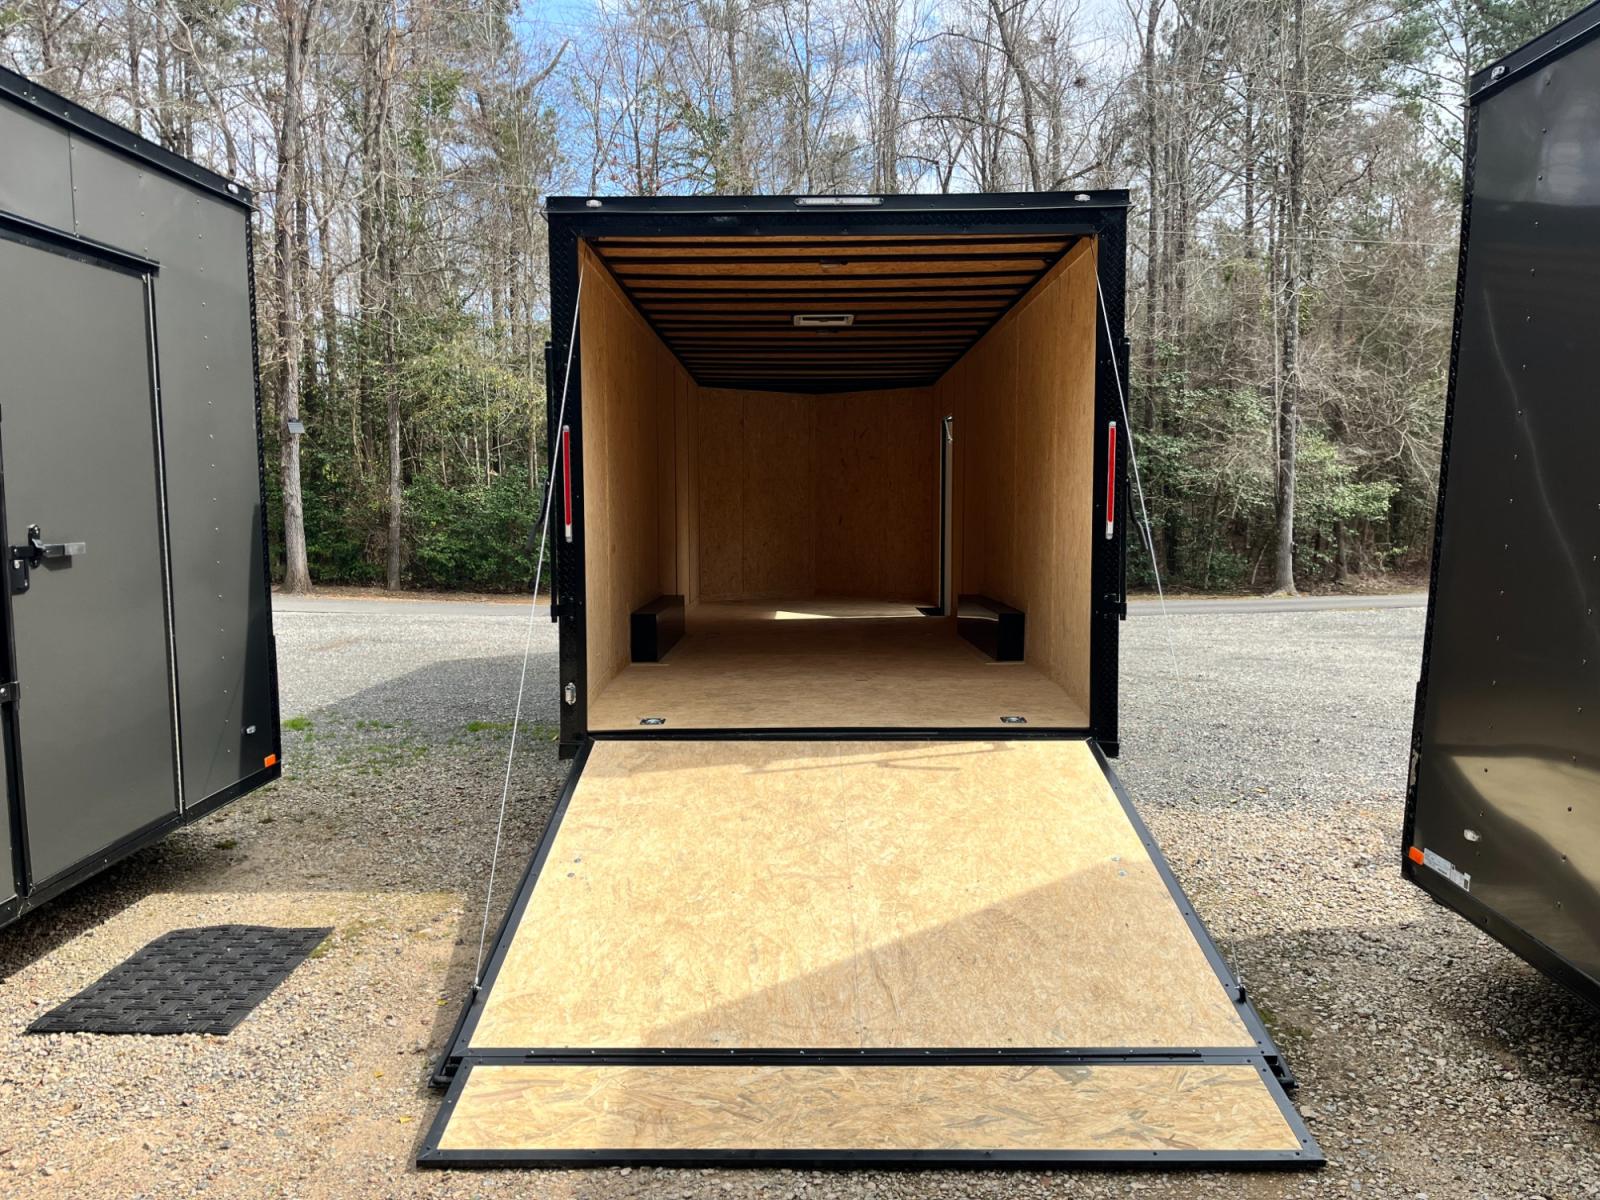 2023 .080 Charcoal Metallic w/Black Out Pkg. Elite Cargo 8.5ft X 24ft Tandem , located at 1330 Rainey Rd., Macon, 31220, (478) 960-1044, 32.845638, -83.778687 - Brand New 2023 Model Elite Cargo Trailer, Made in Tifton, GA 7ft 5" Tall Inside Height This Deluxe Enclosed Car Hauler has Awesome Features! .080 Thick Charcoal Metallic Skin! Awesome "Black Out Trim Package!" 2 Inside LED Dome Lights with Wall Switch! Much Taller Inside, 7ft 5" Tall Inside. Th - Photo #8